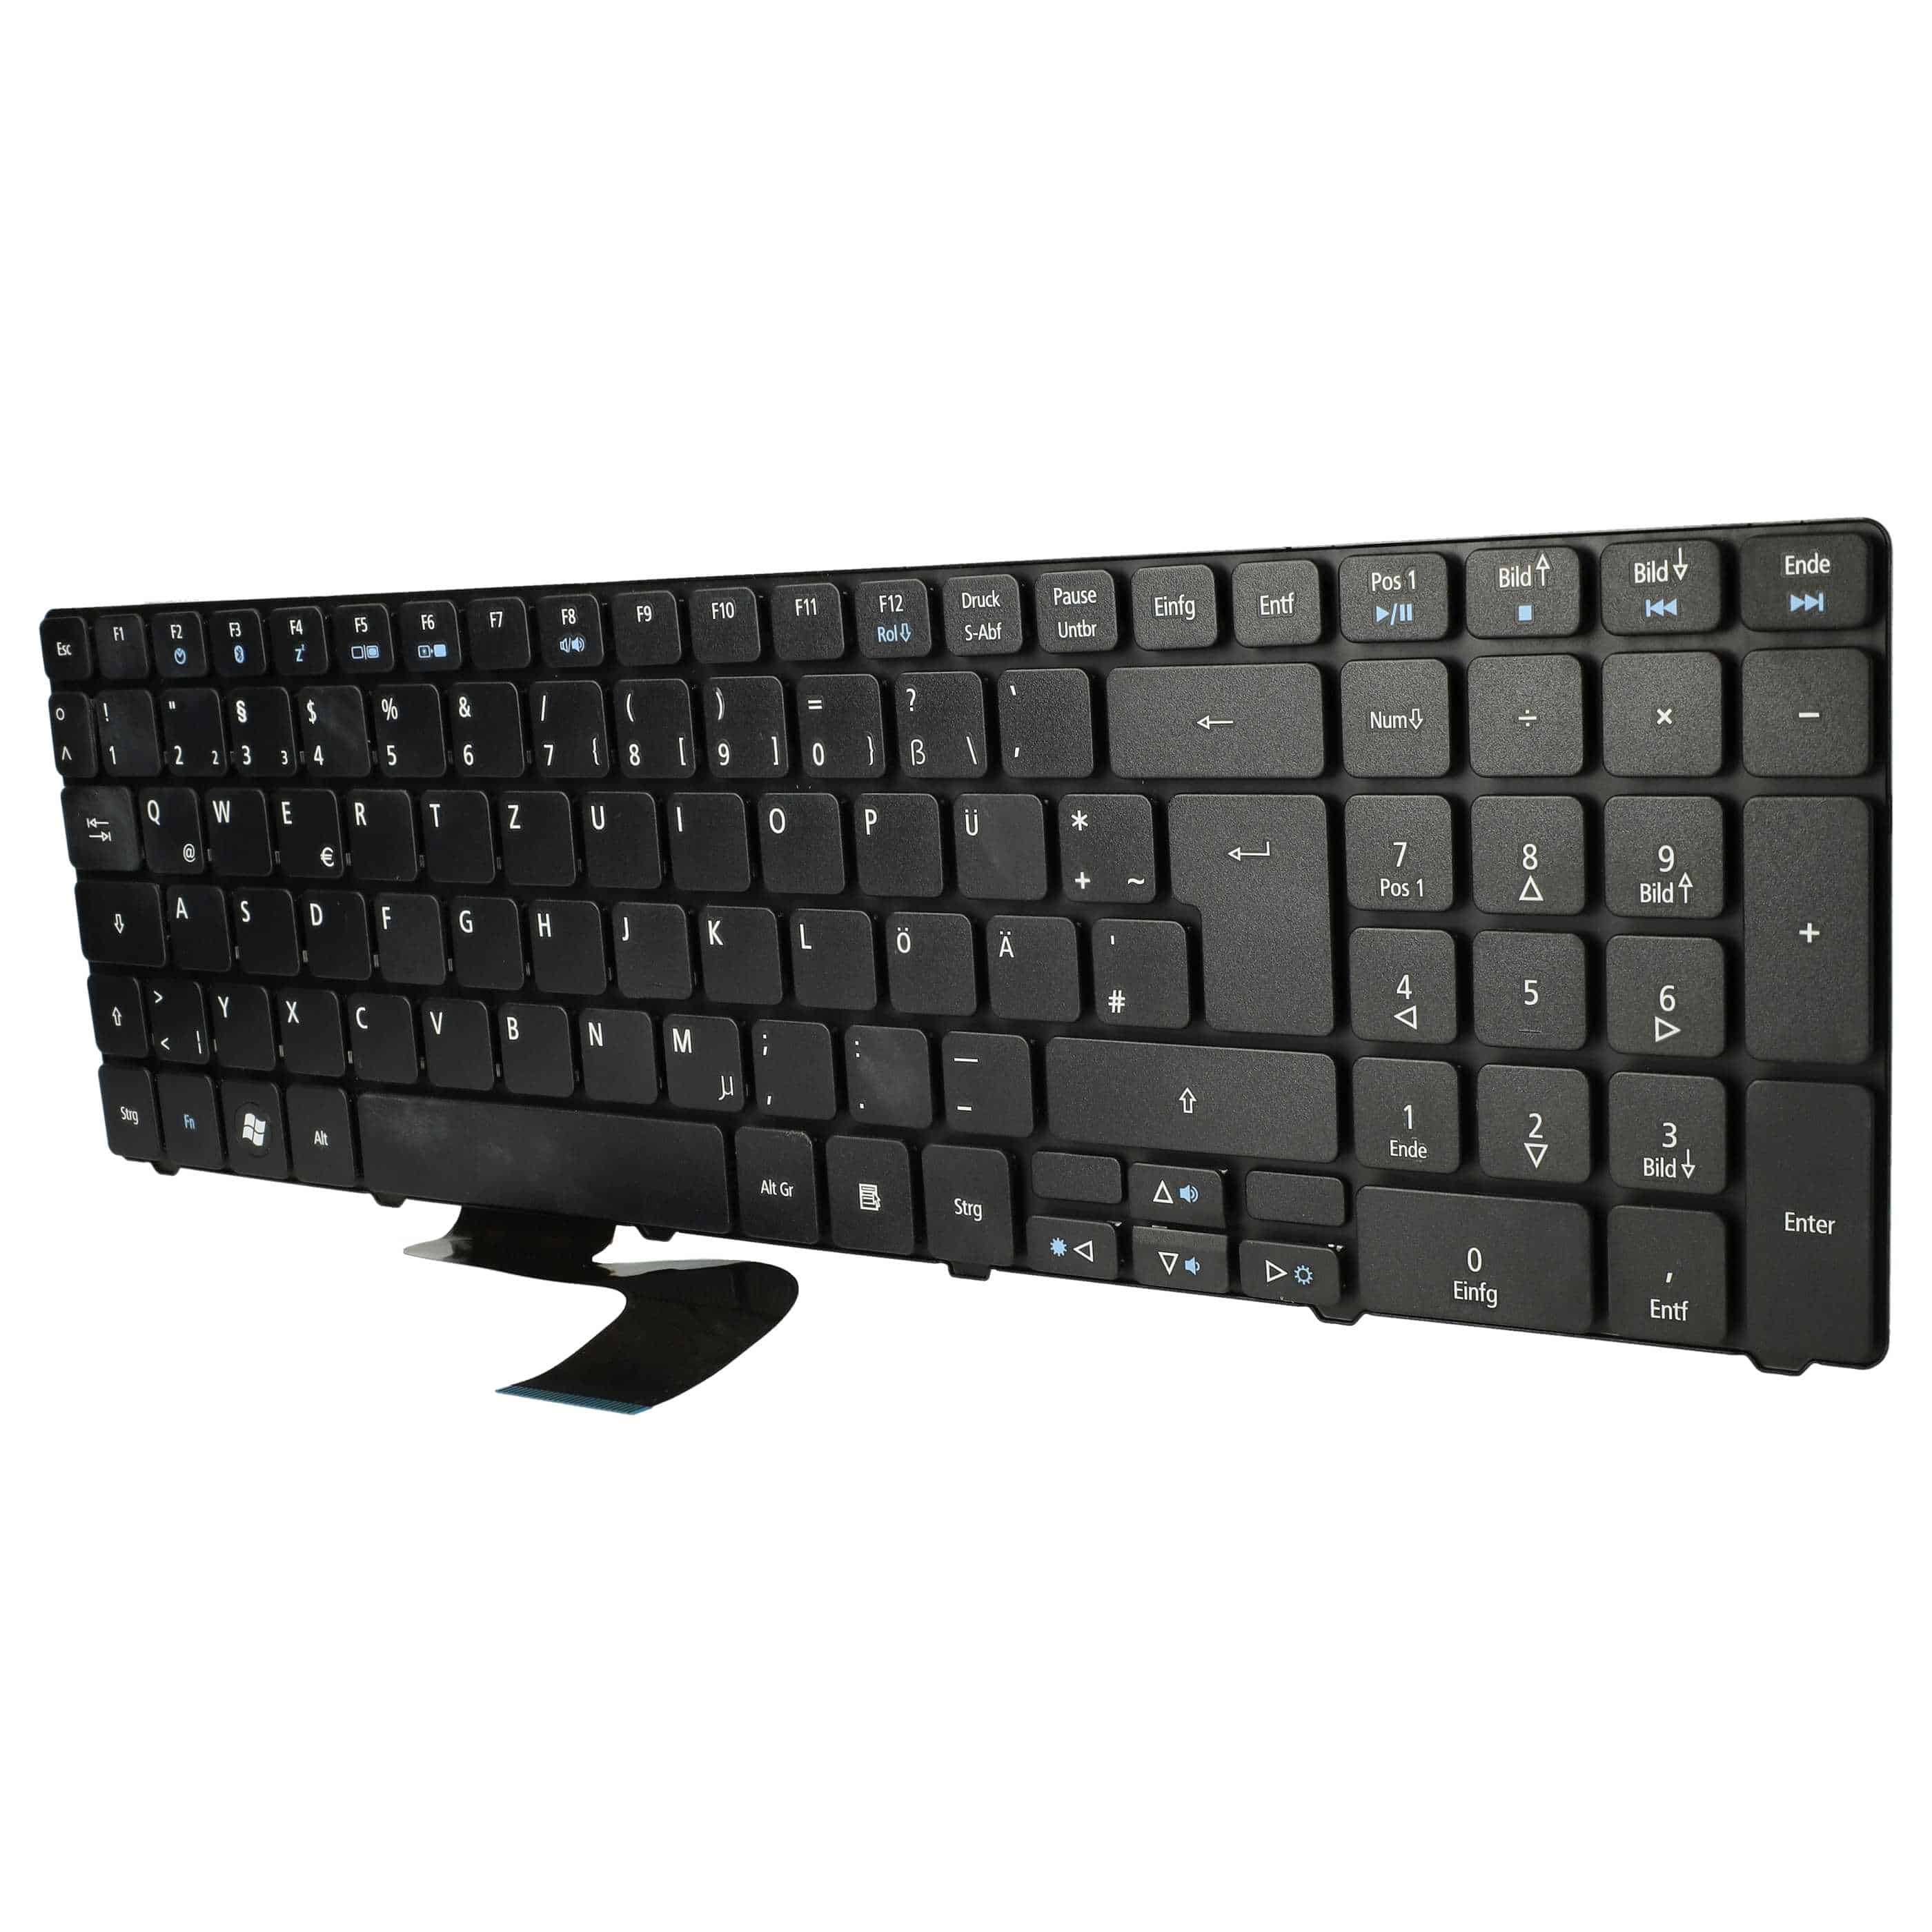 Keyboard replaces Acer 491274-B31, 9J.N8682.R1D, 490267-B31 for notebook - black with numeric keypad QWERTZ